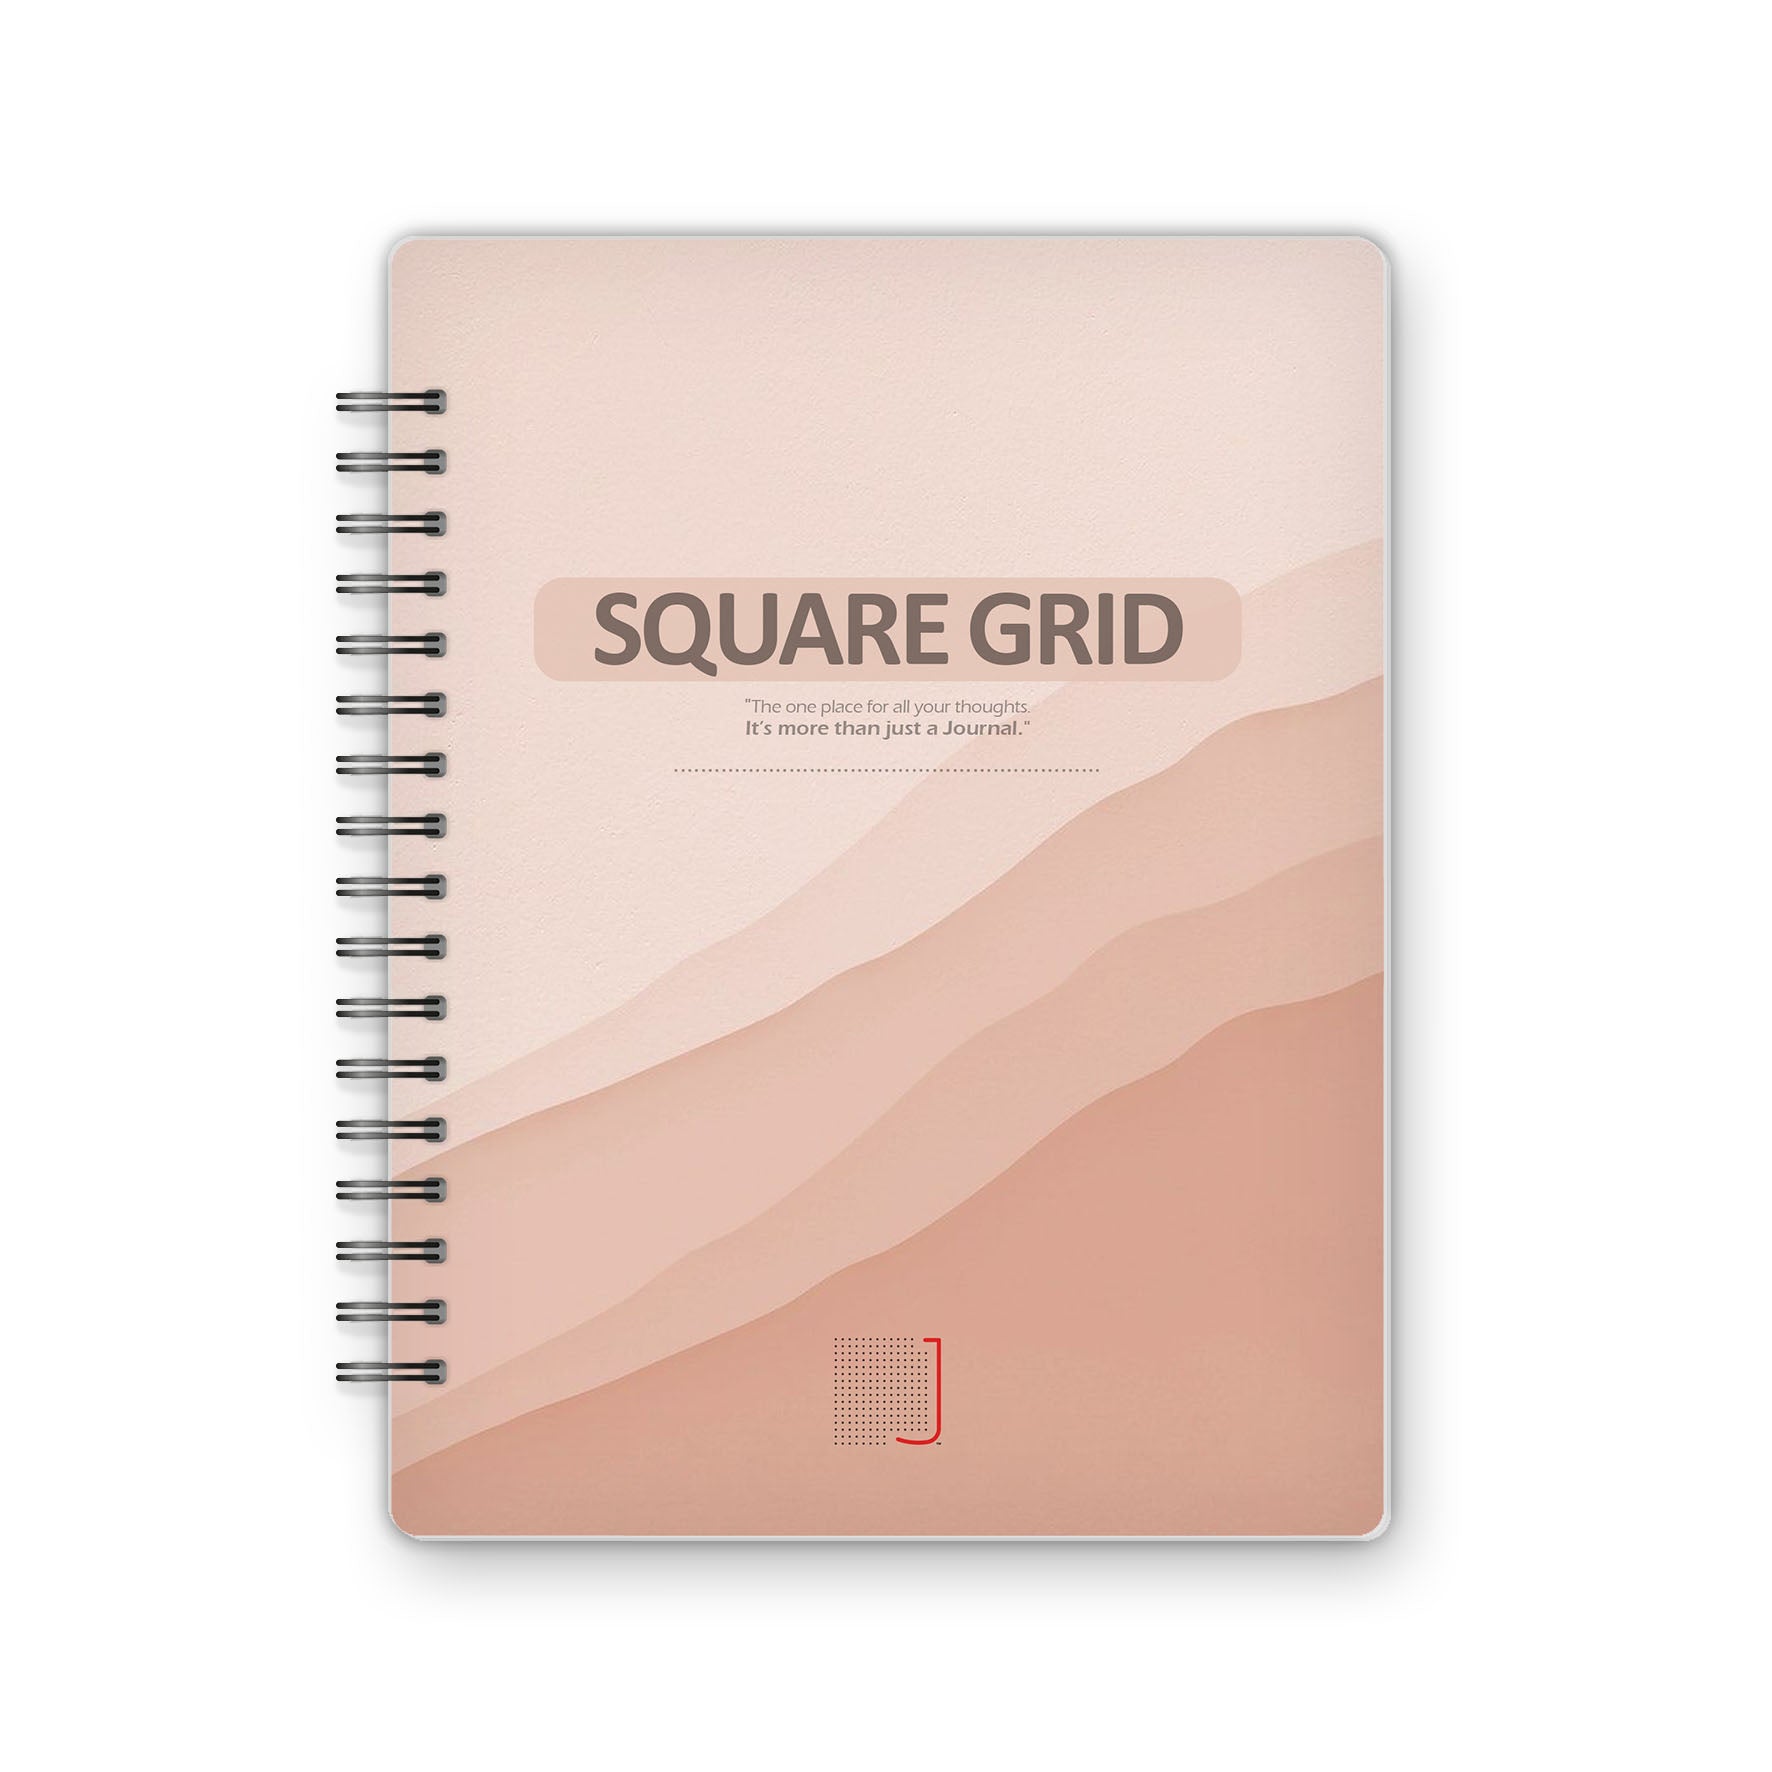 Square Grid - 18X14 cm - 75 Sheets | Pink Leaf 02 - from Journals